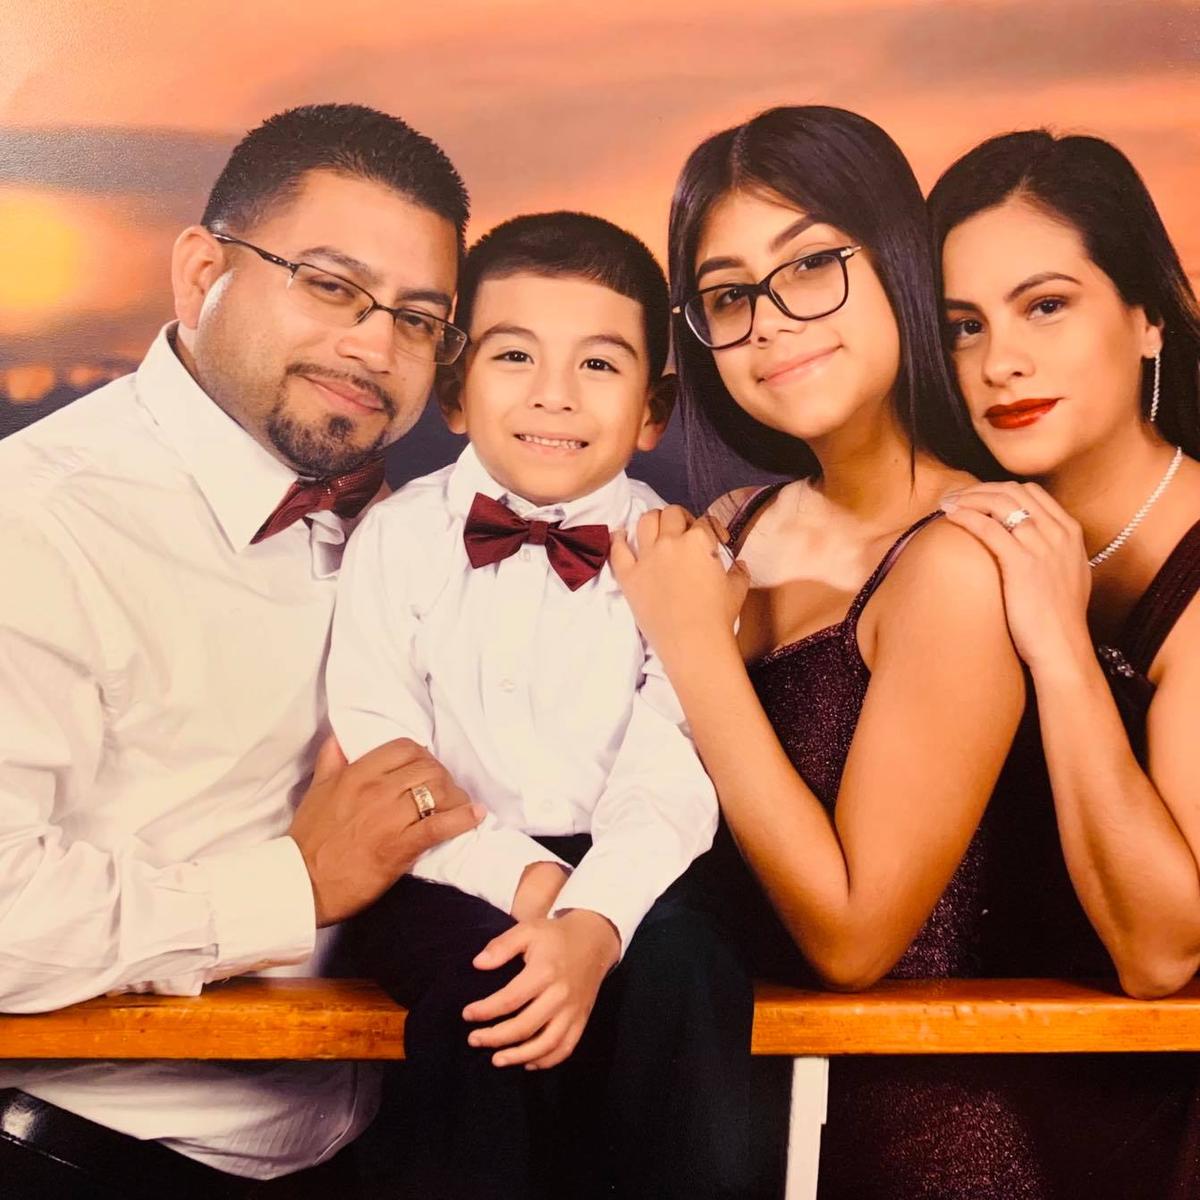 Michael Martinez with his family. (Courtesy of <a href="https://www.facebook.com/angie.martinez.5076">Angie Casas Martinez</a>)